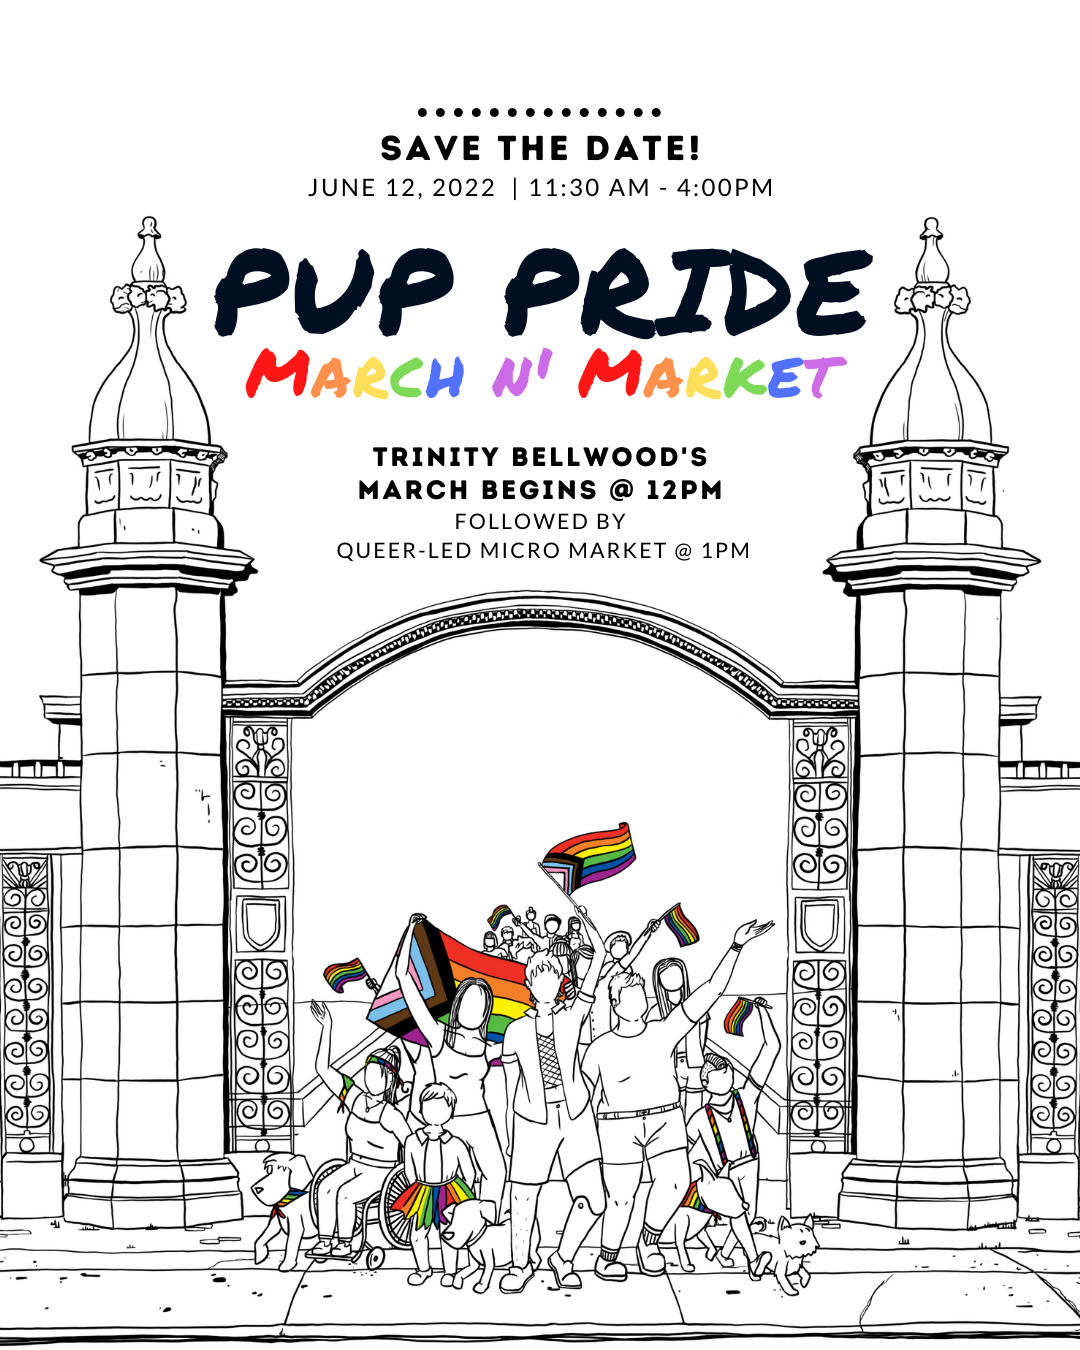 Pup Pride: March n Market Event